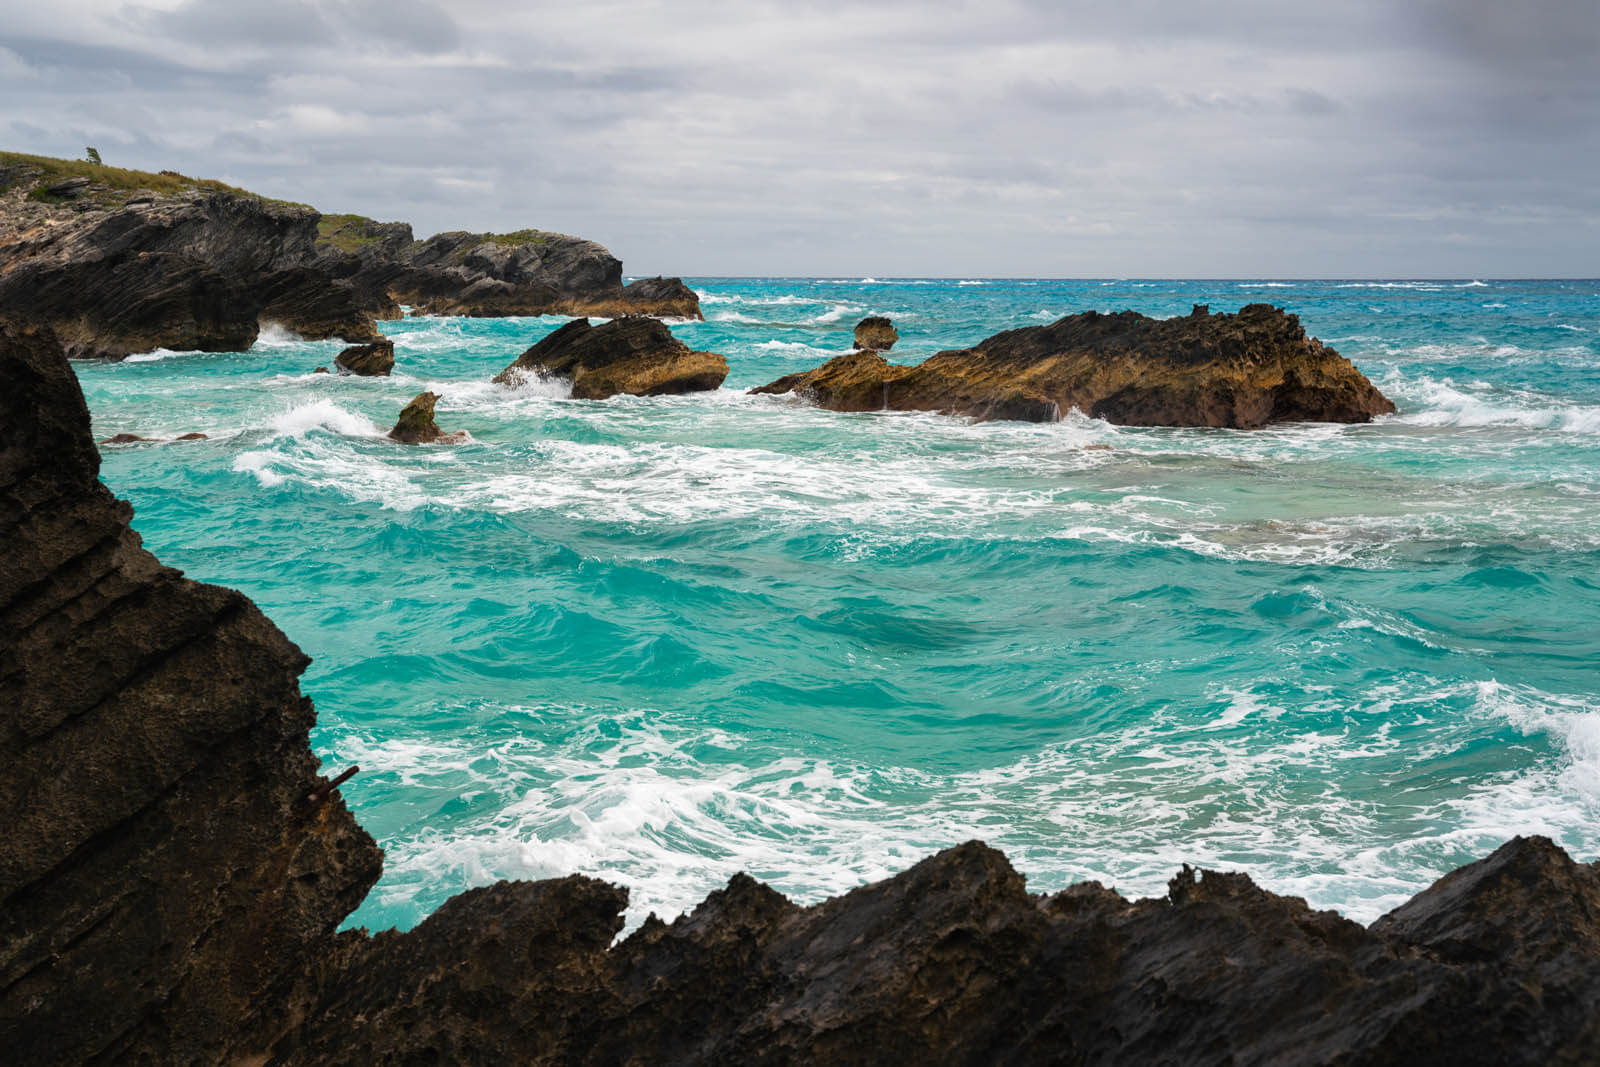 8 things to do on your first trip to Bermuda - Bermuda travel guide